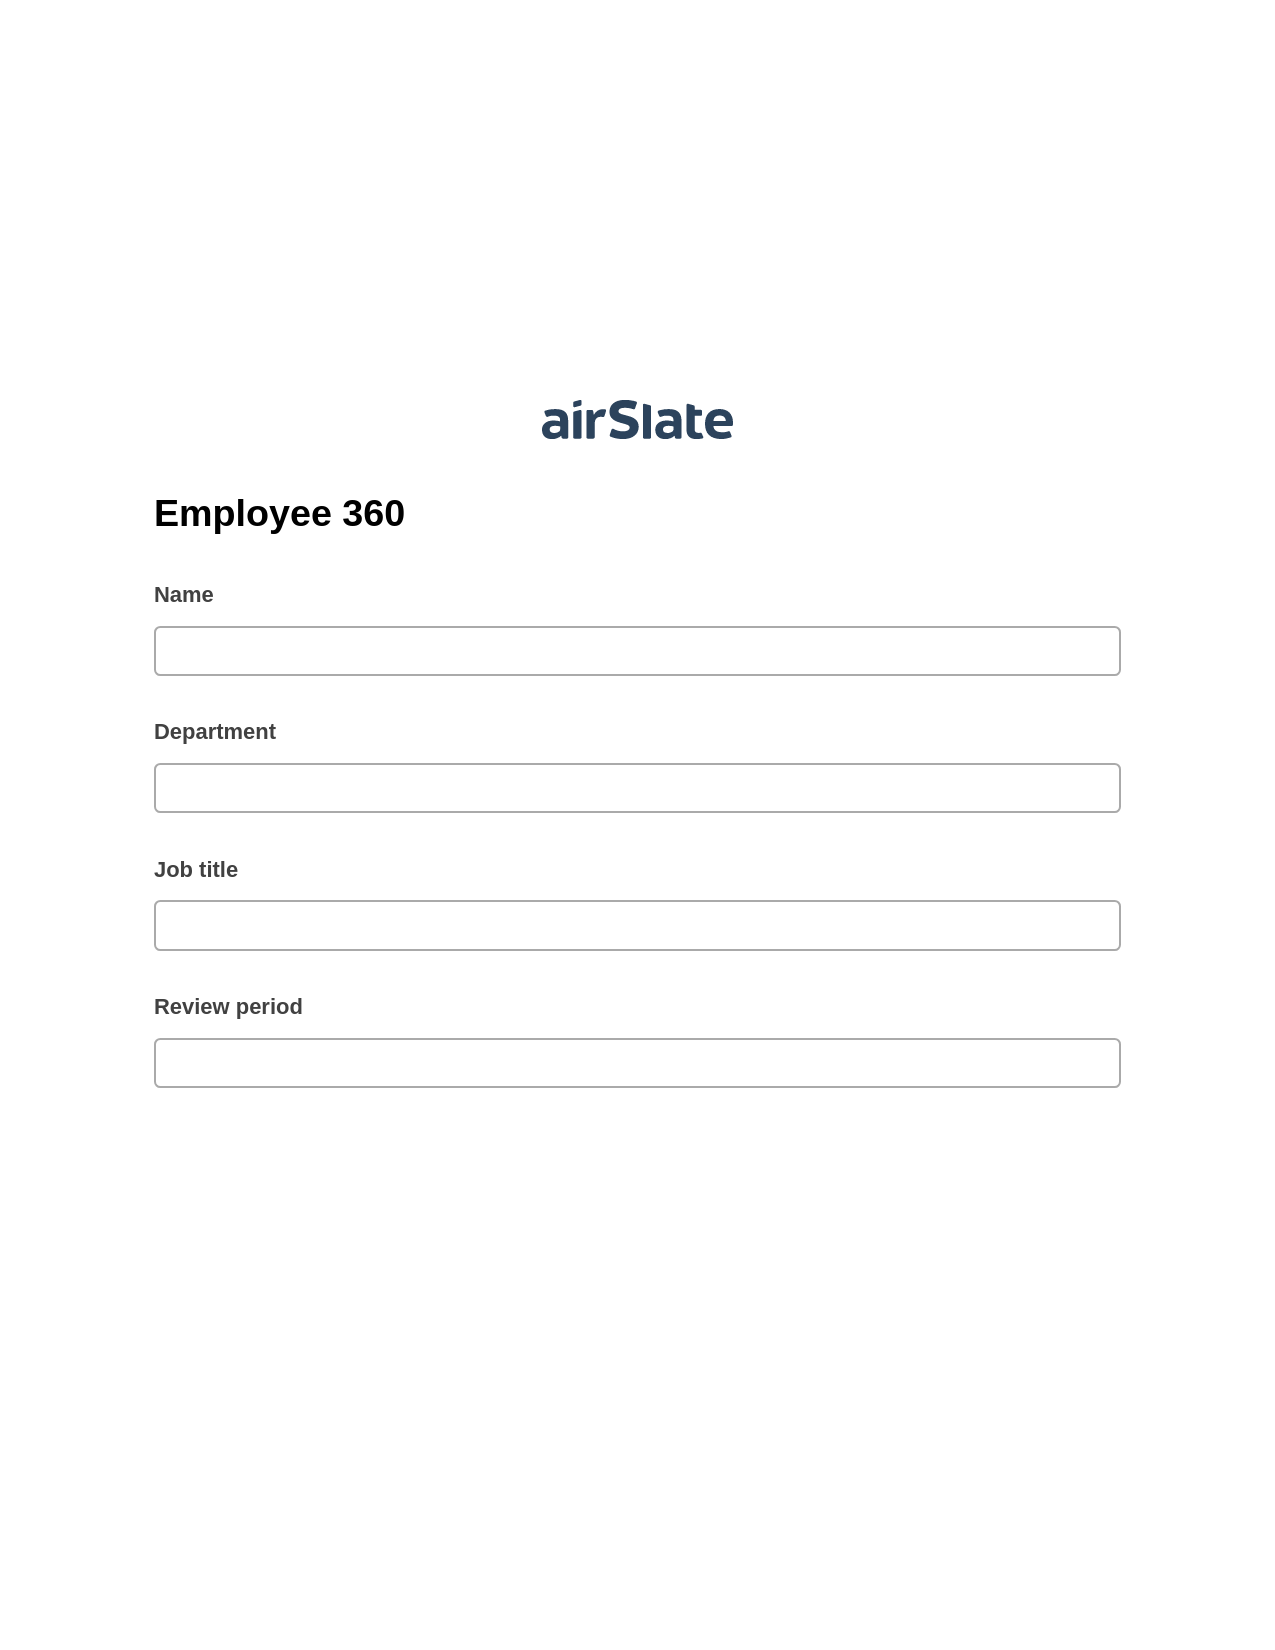 Multirole Employee 360 Pre-fill from another Slate Bot, Create Slate every Google Sheet Update Bot, Export to Smartsheet